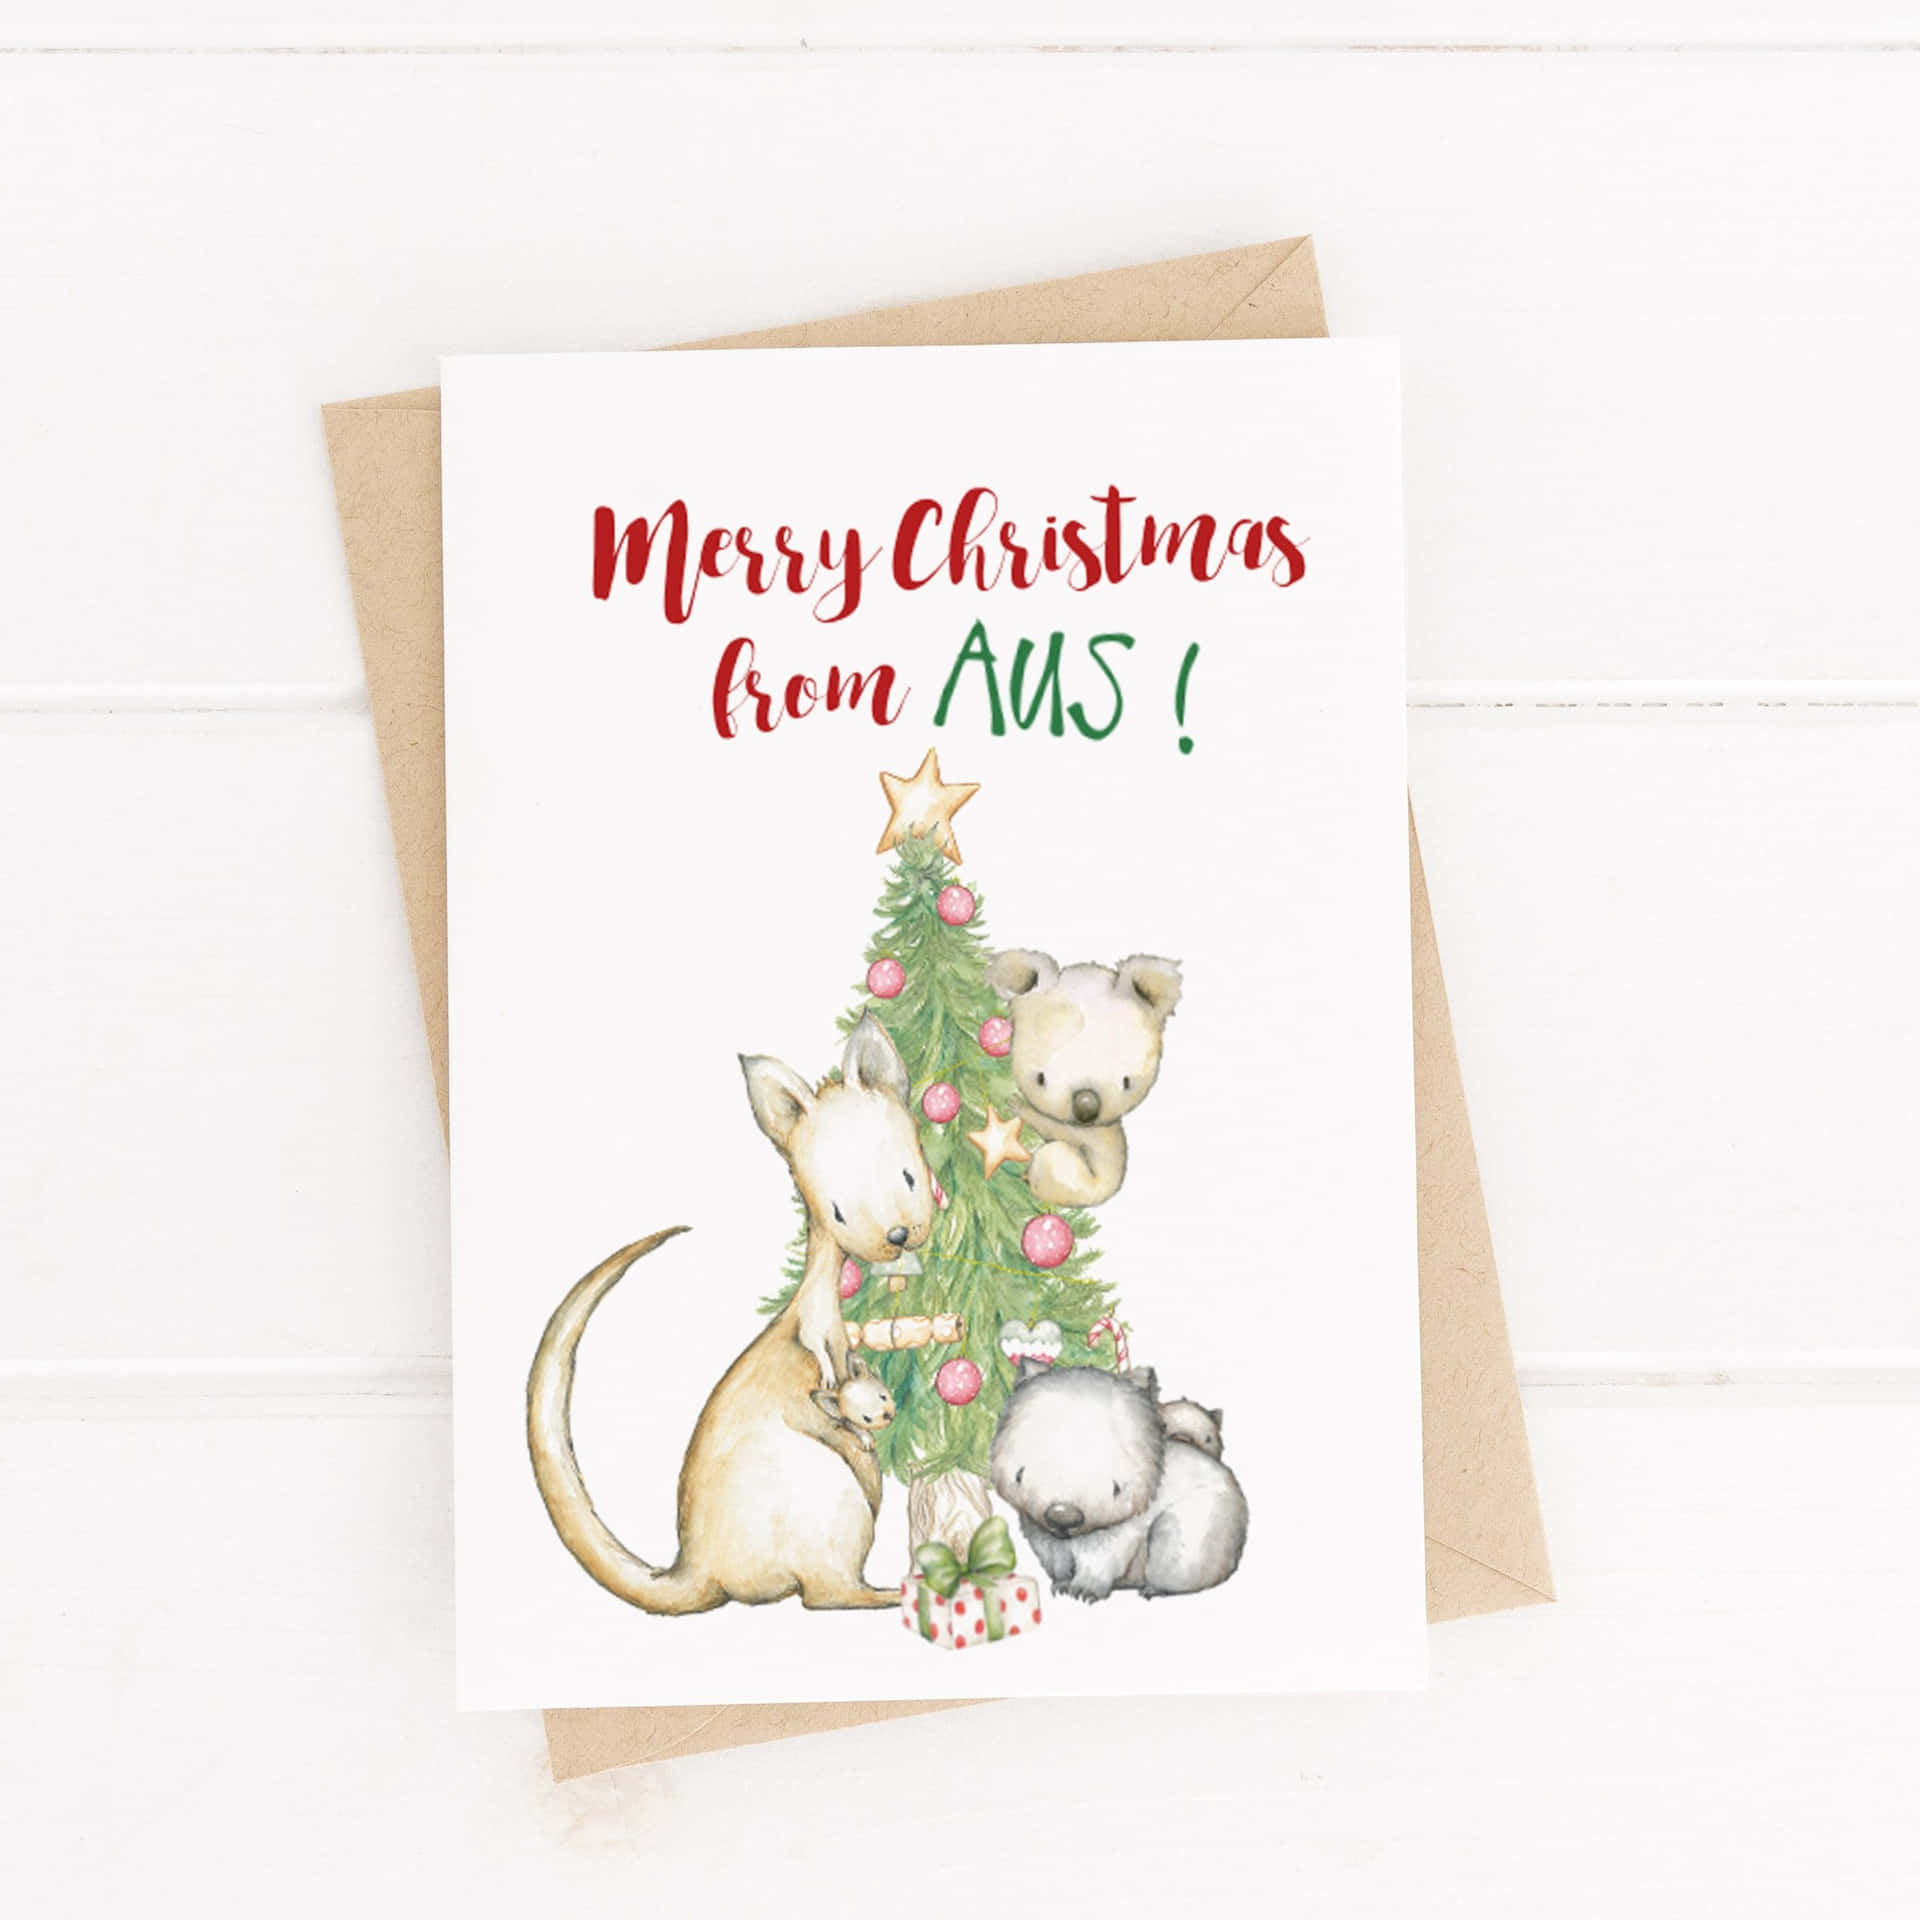 Merry Christmas Card With A Cat And A Dog